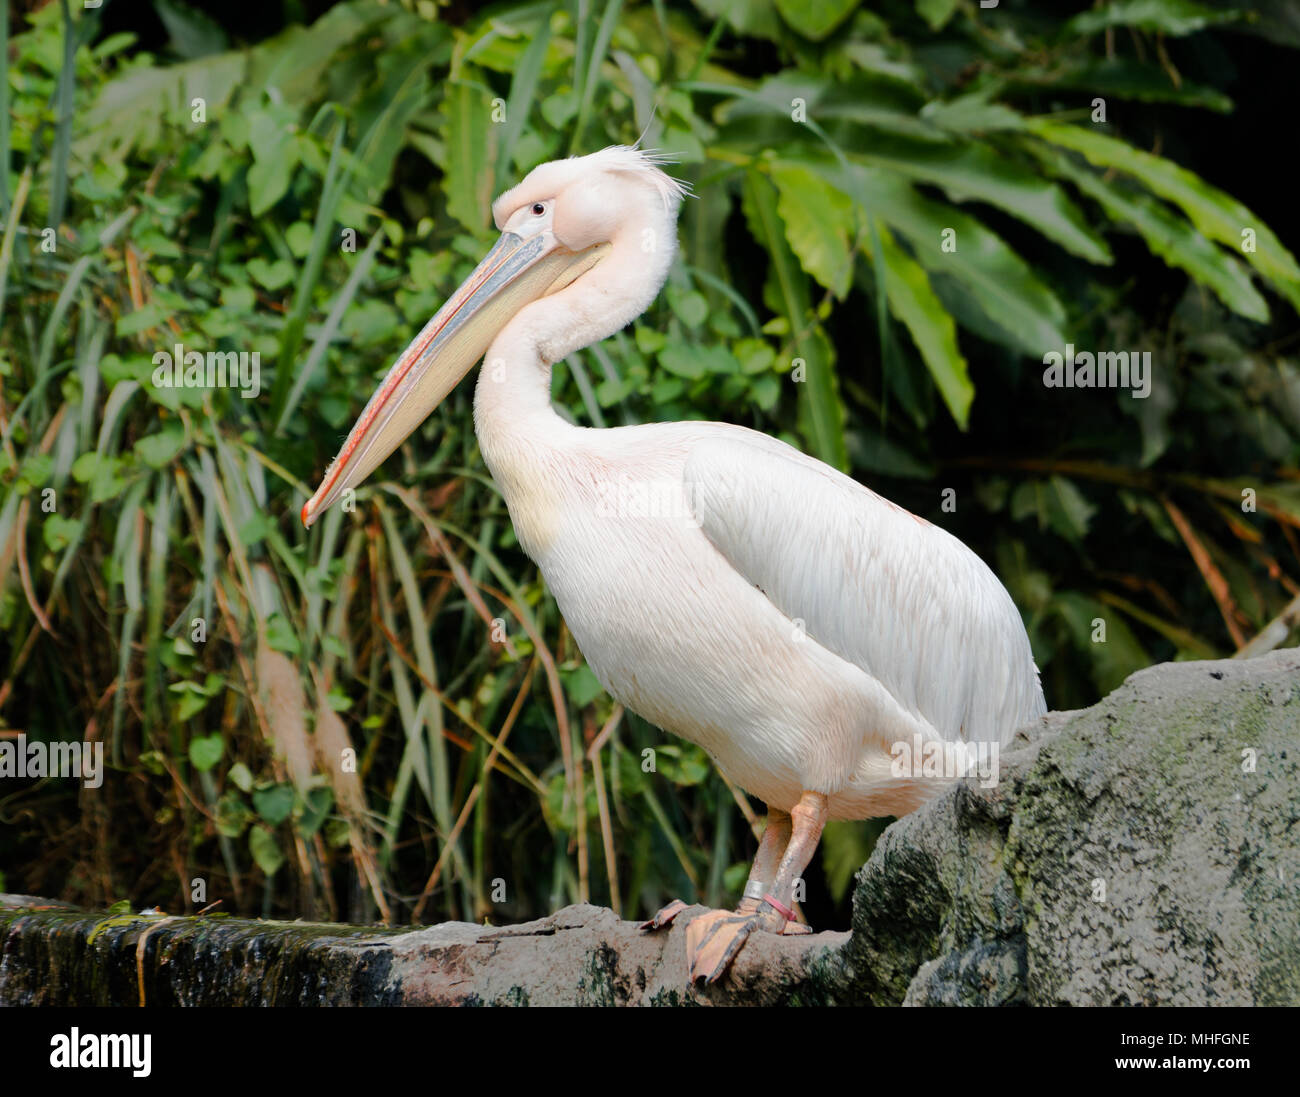 Great eastern white pelican bird or Pelecanus onocrotalus on the ground Stock Photo